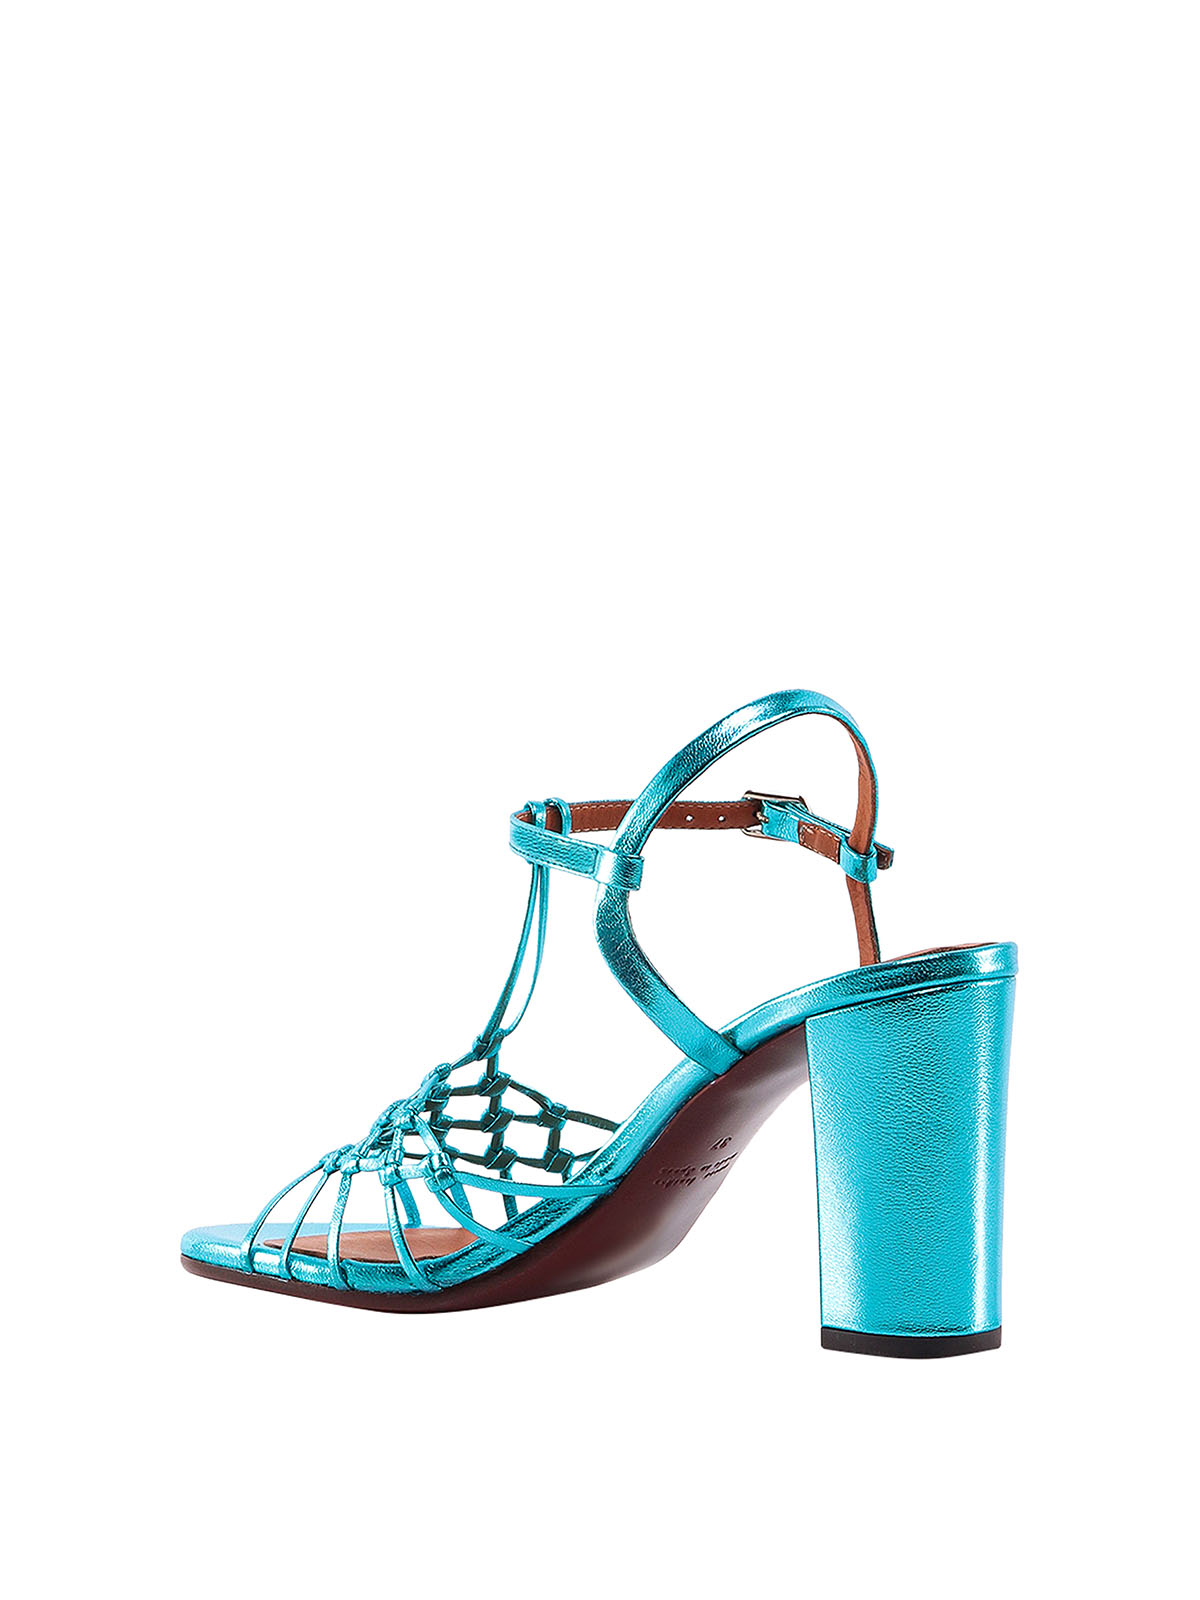 Shop Chie Mihara Laminated Leather Sandals In Blue